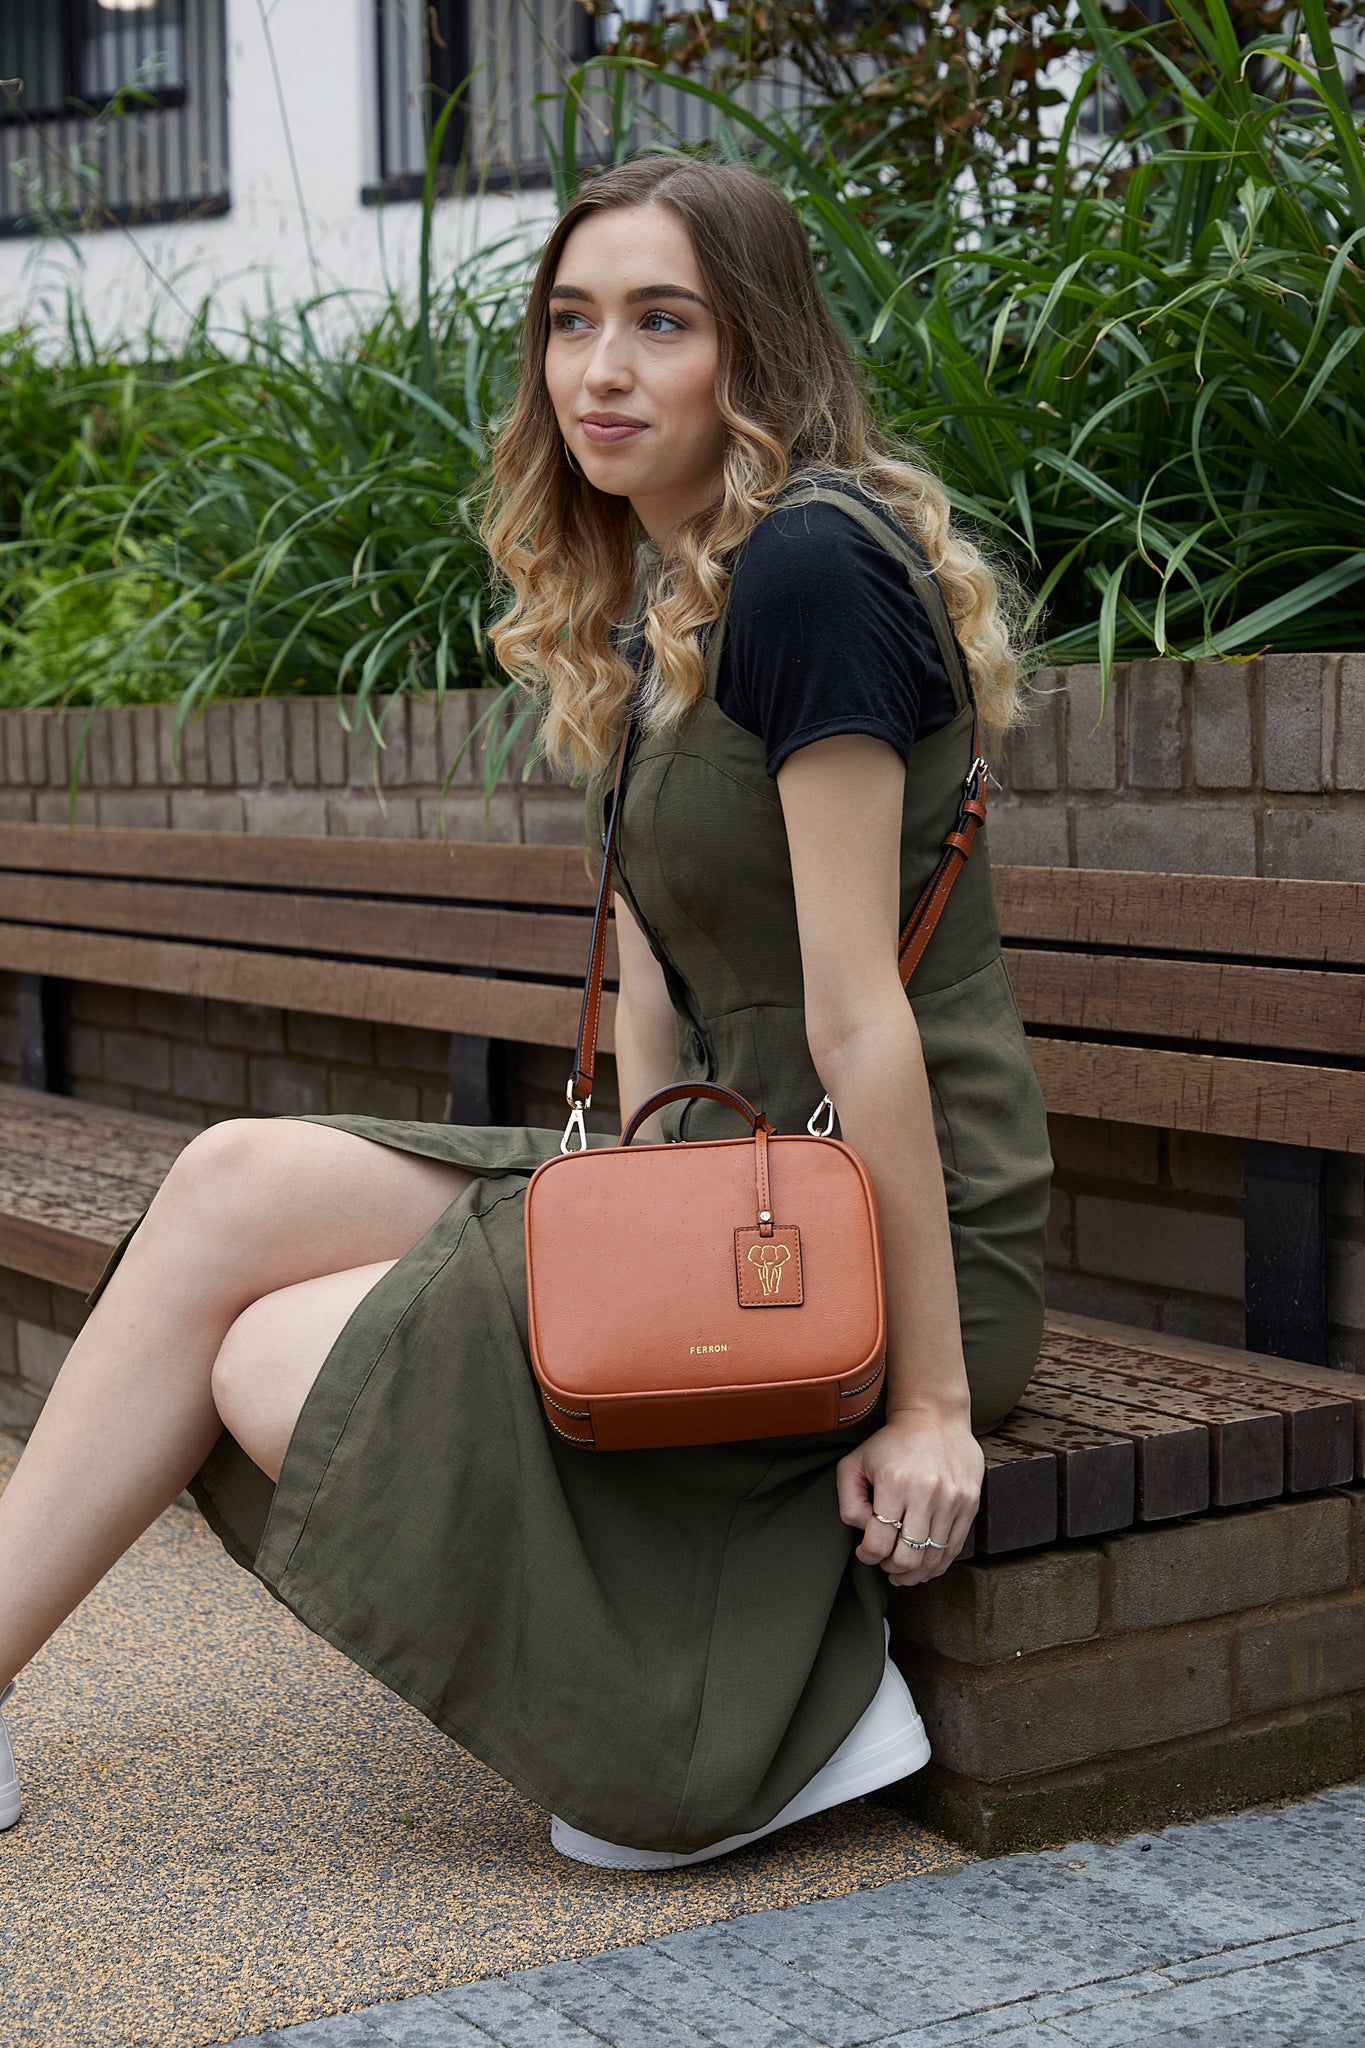 Model sitting wearing FERRON Vegan Signature Crossbody bag in tan with adjustable and detachable straps